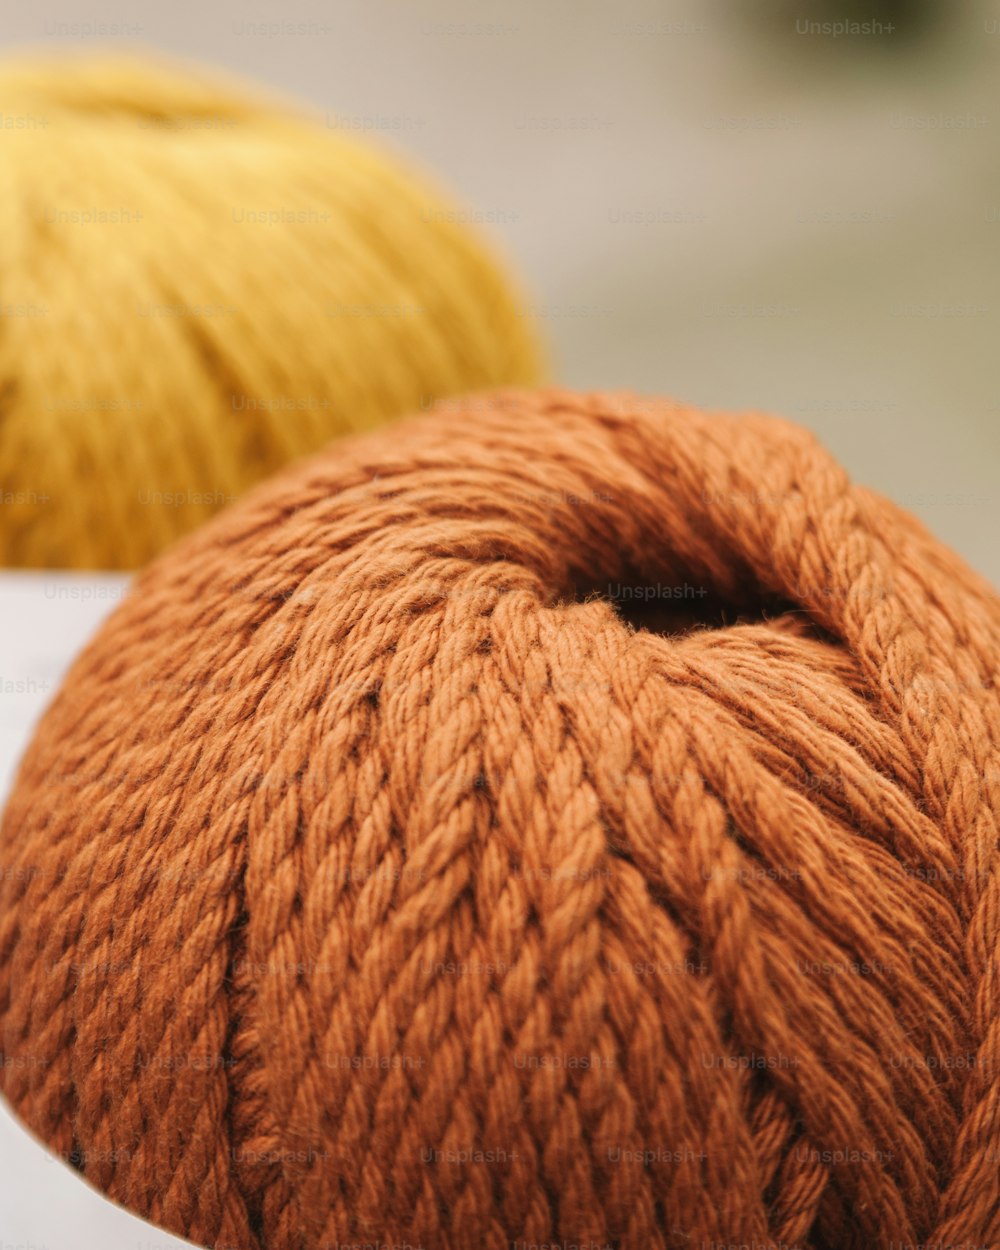 two balls of yarn sitting next to each other